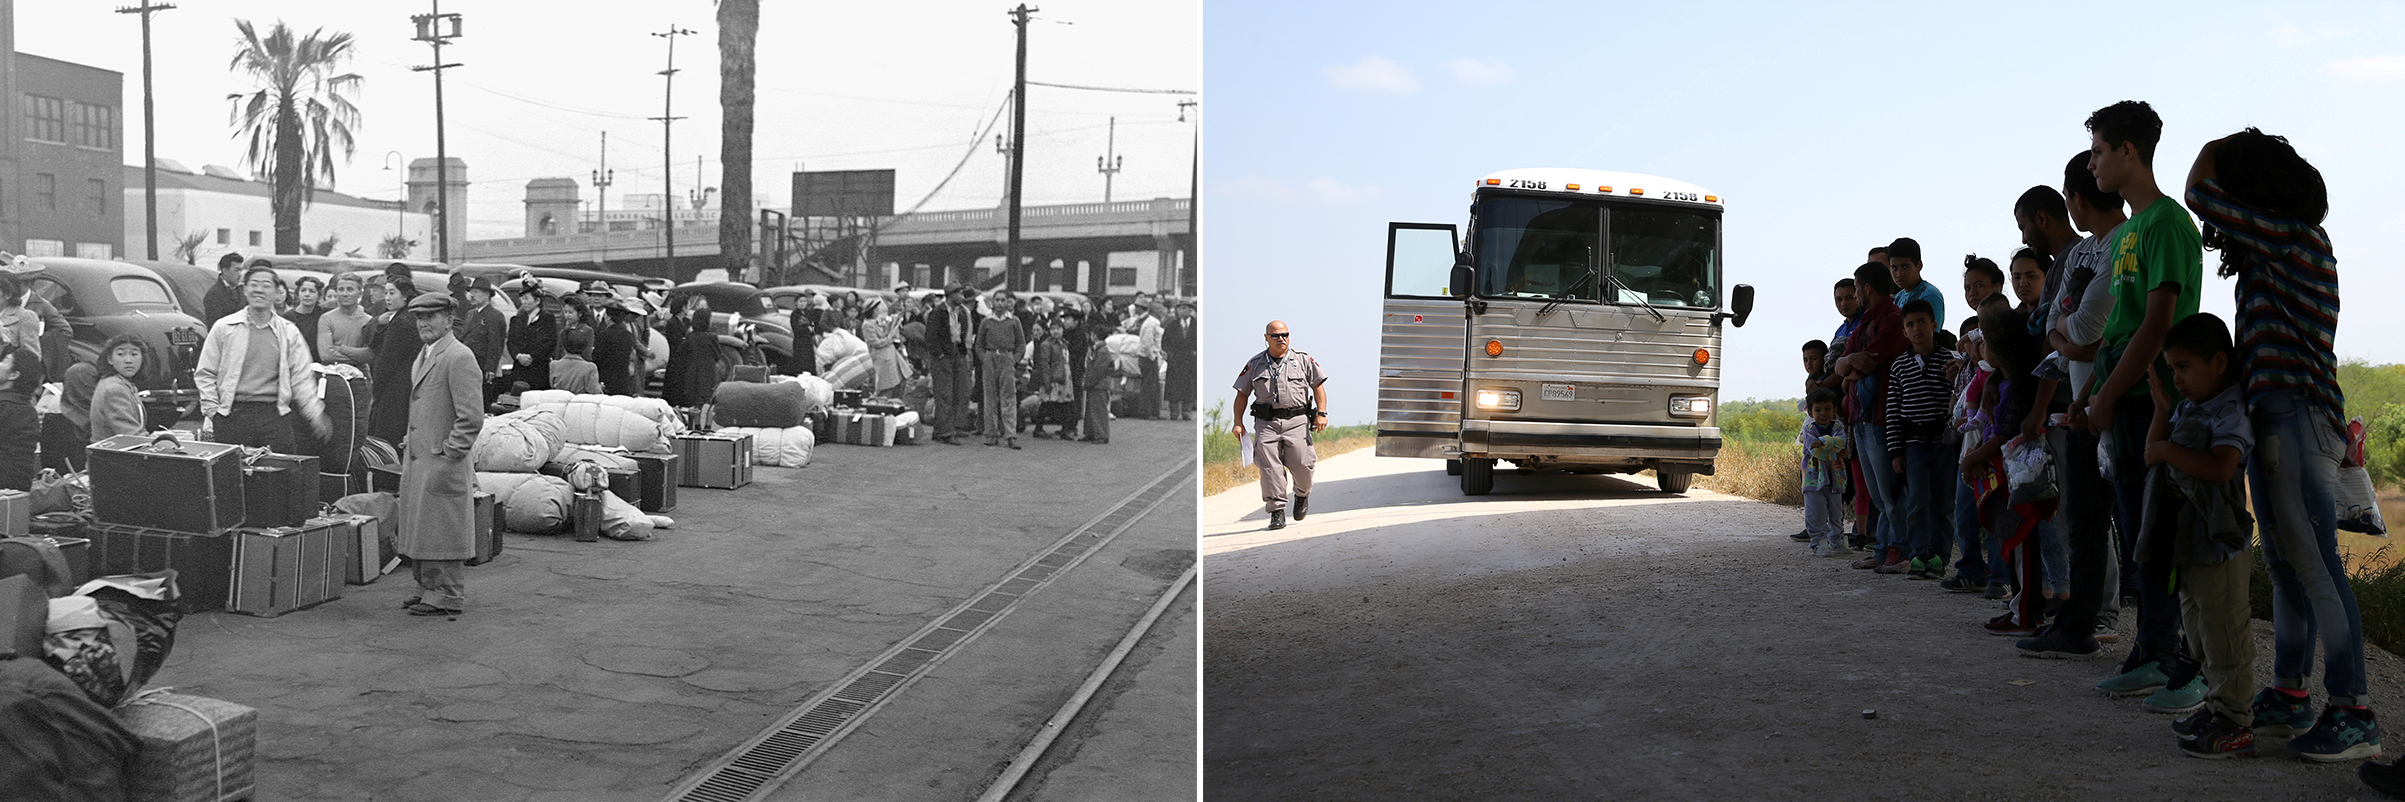 Left: Japanese-Americans in Los Angeles, California, waiting for the train to take them to Owens Valley internment camp in April 1942. Right: Pedestrian travelers wait in a U.S. Customs and Border Protection line at the Mexico-U.S. border port of entry in Hidalgo, Texas, on April 13, 2018. (Getty Images; Loren Elliott—Reuters)